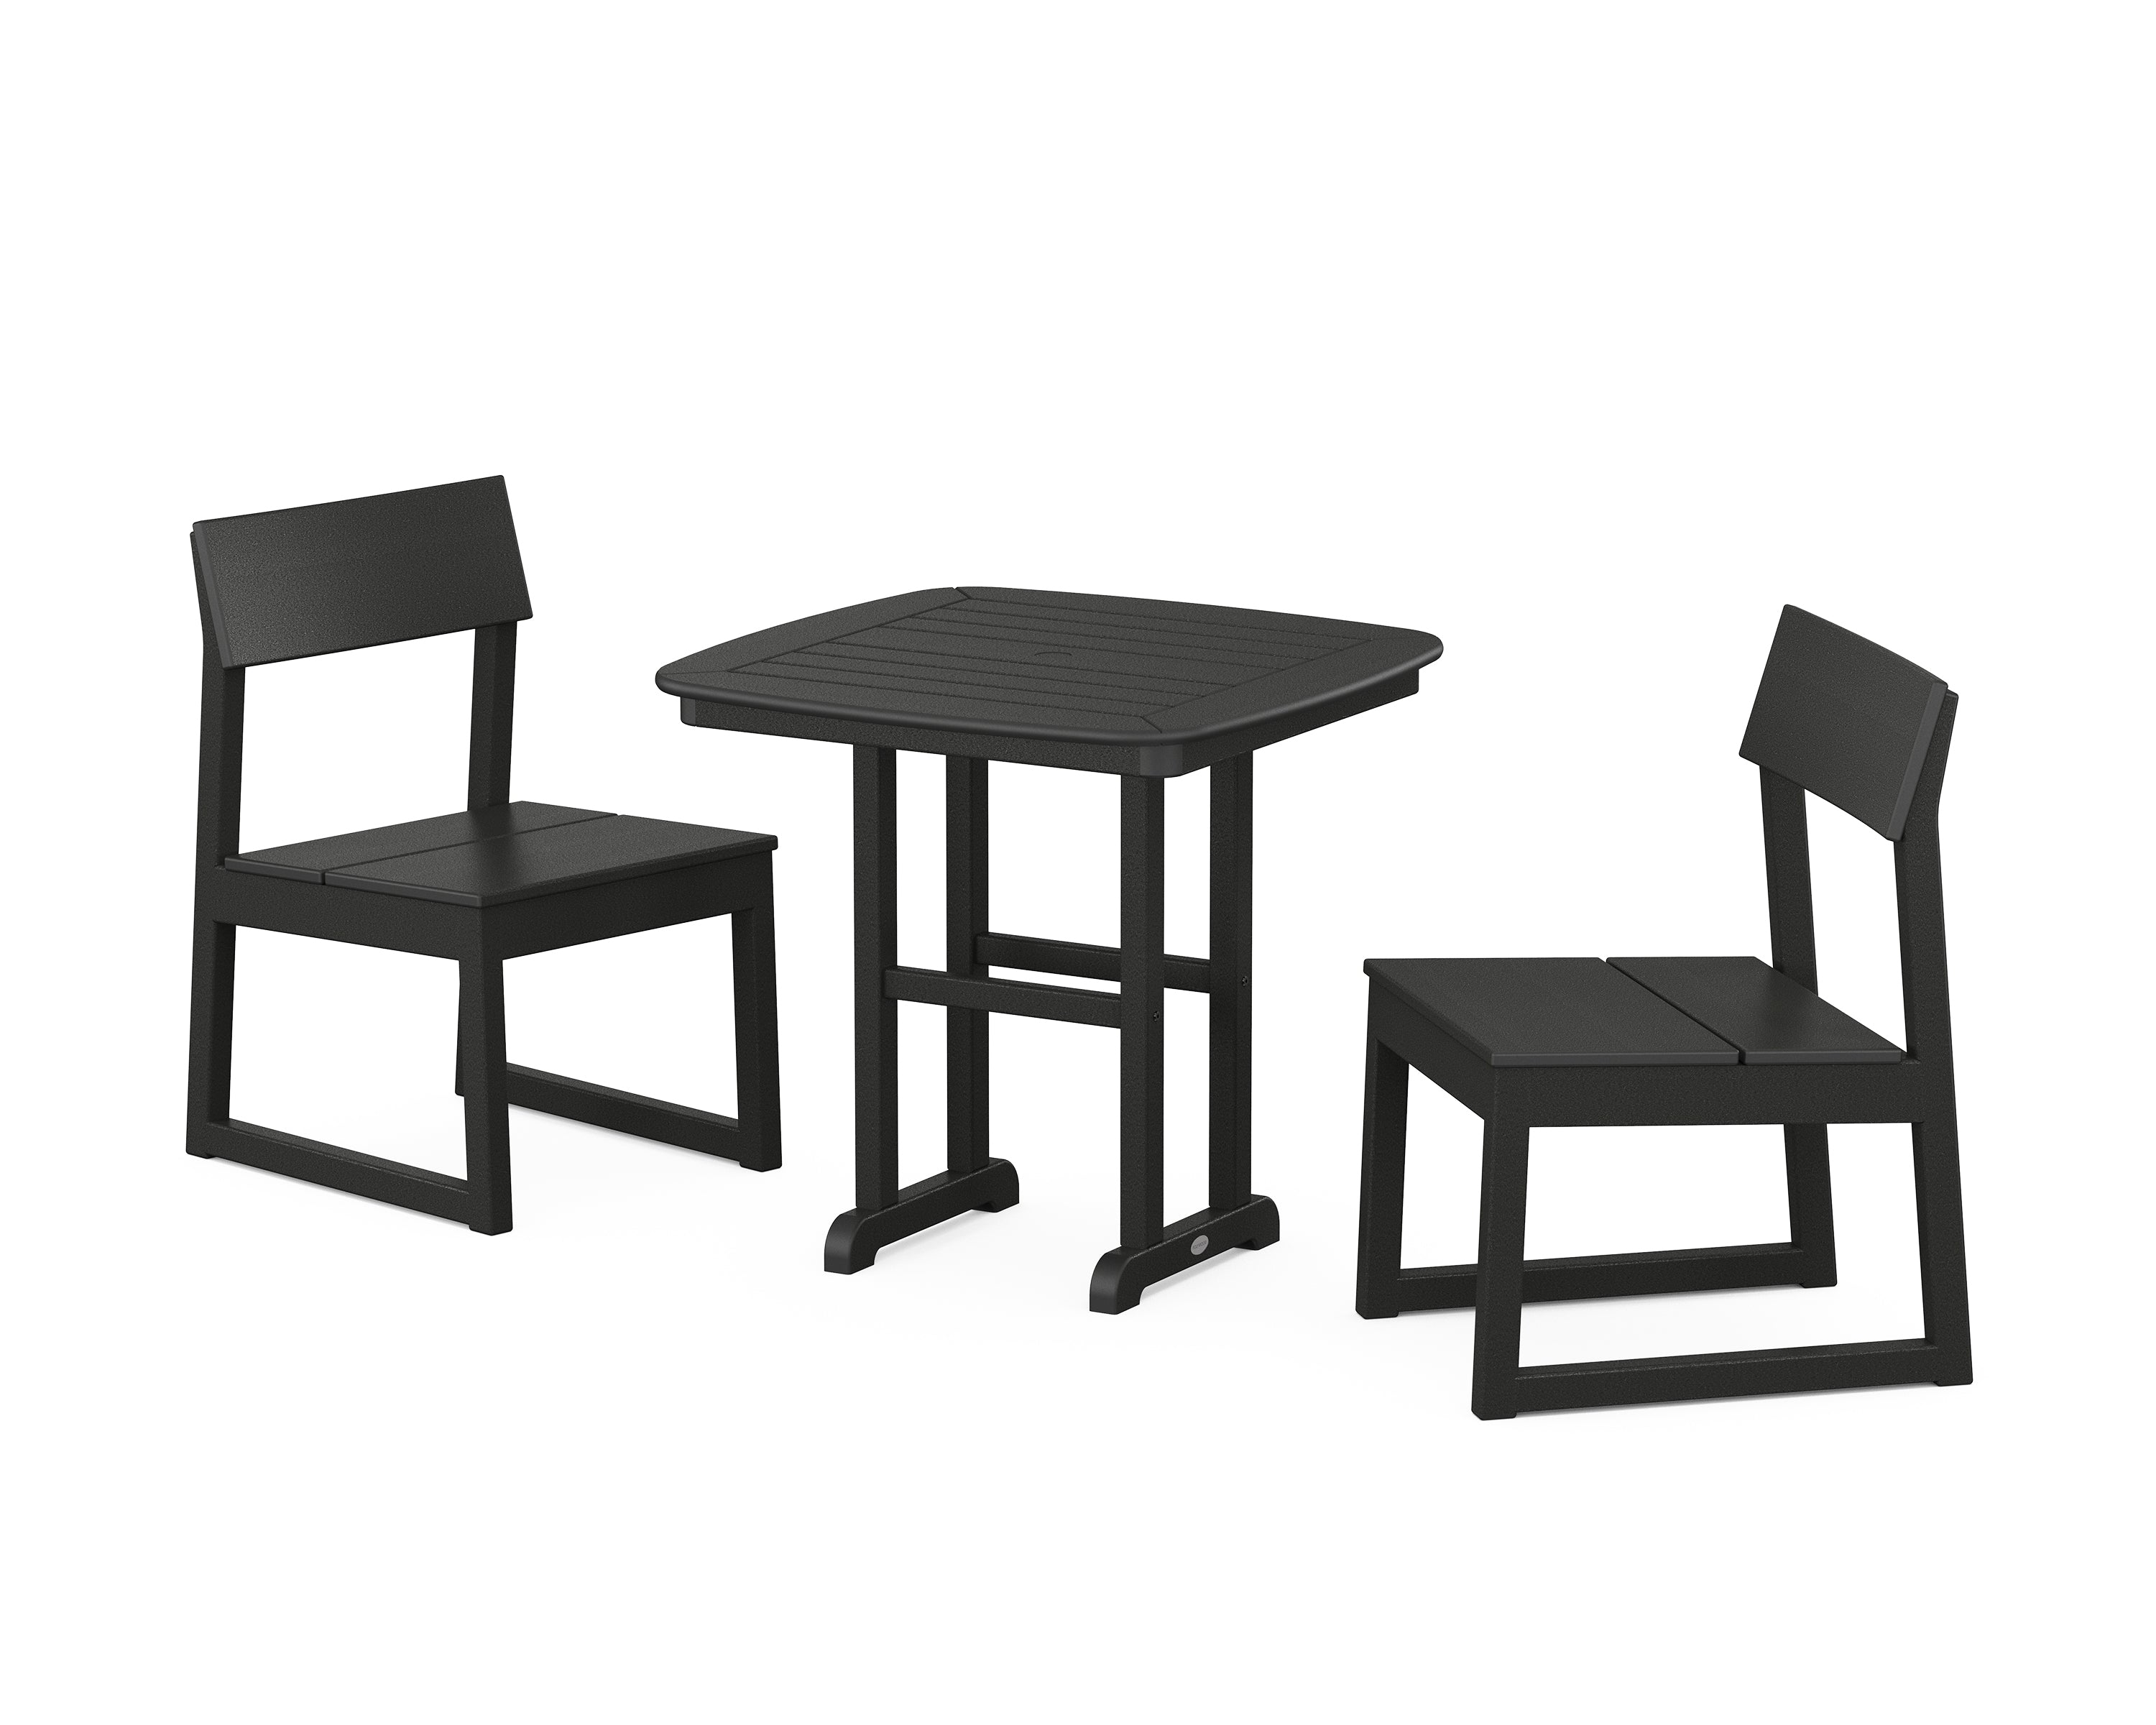 POLYWOOD® EDGE Side Chair 3-Piece Dining Set in Black